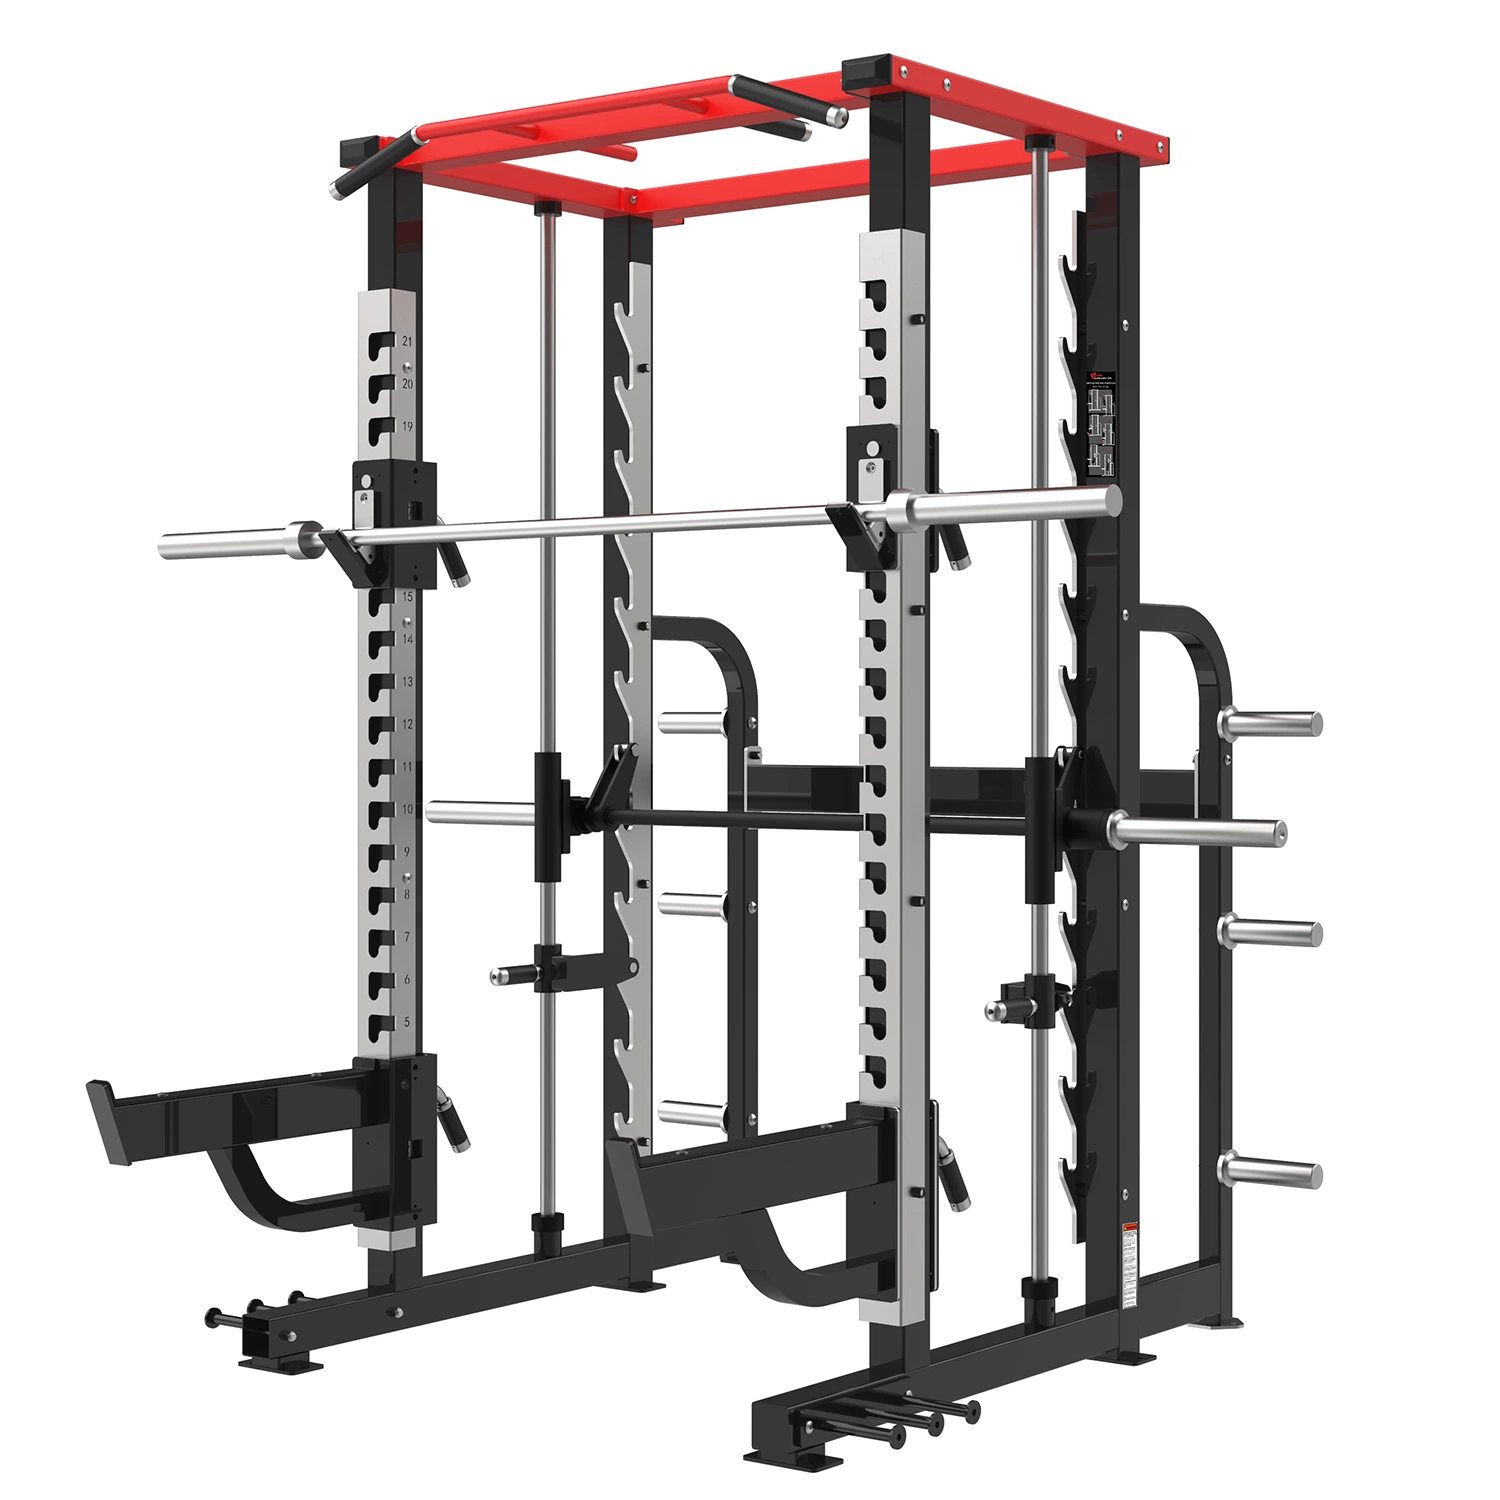 Realleader Home Gym Power rack Outdoor Fitness Blanchisserie Equipement